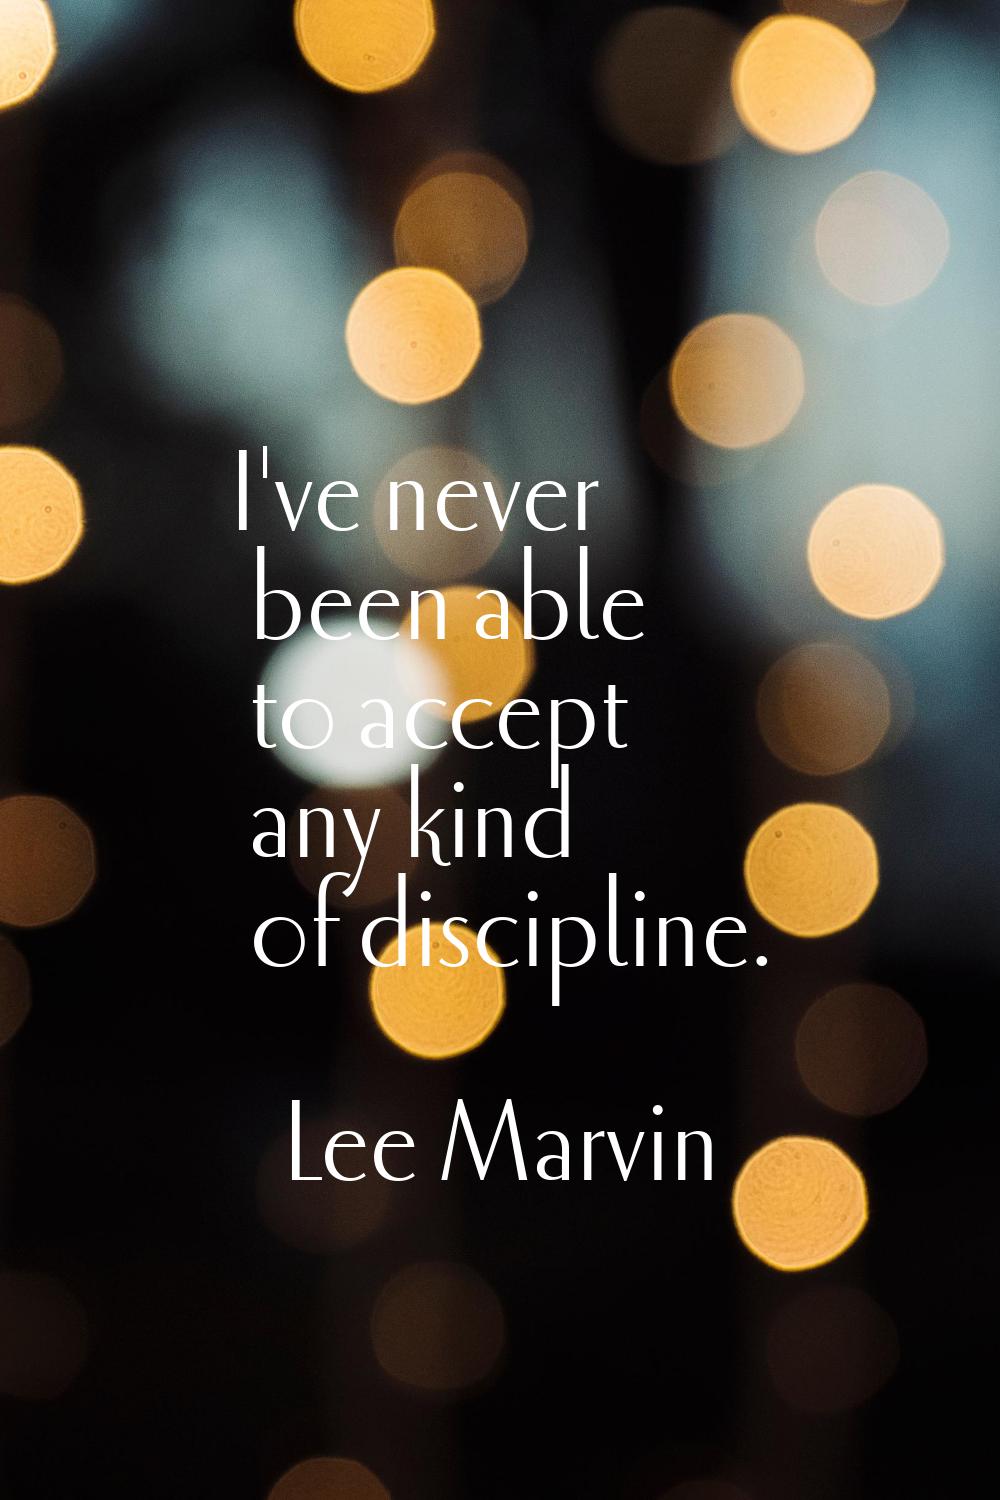 I've never been able to accept any kind of discipline.